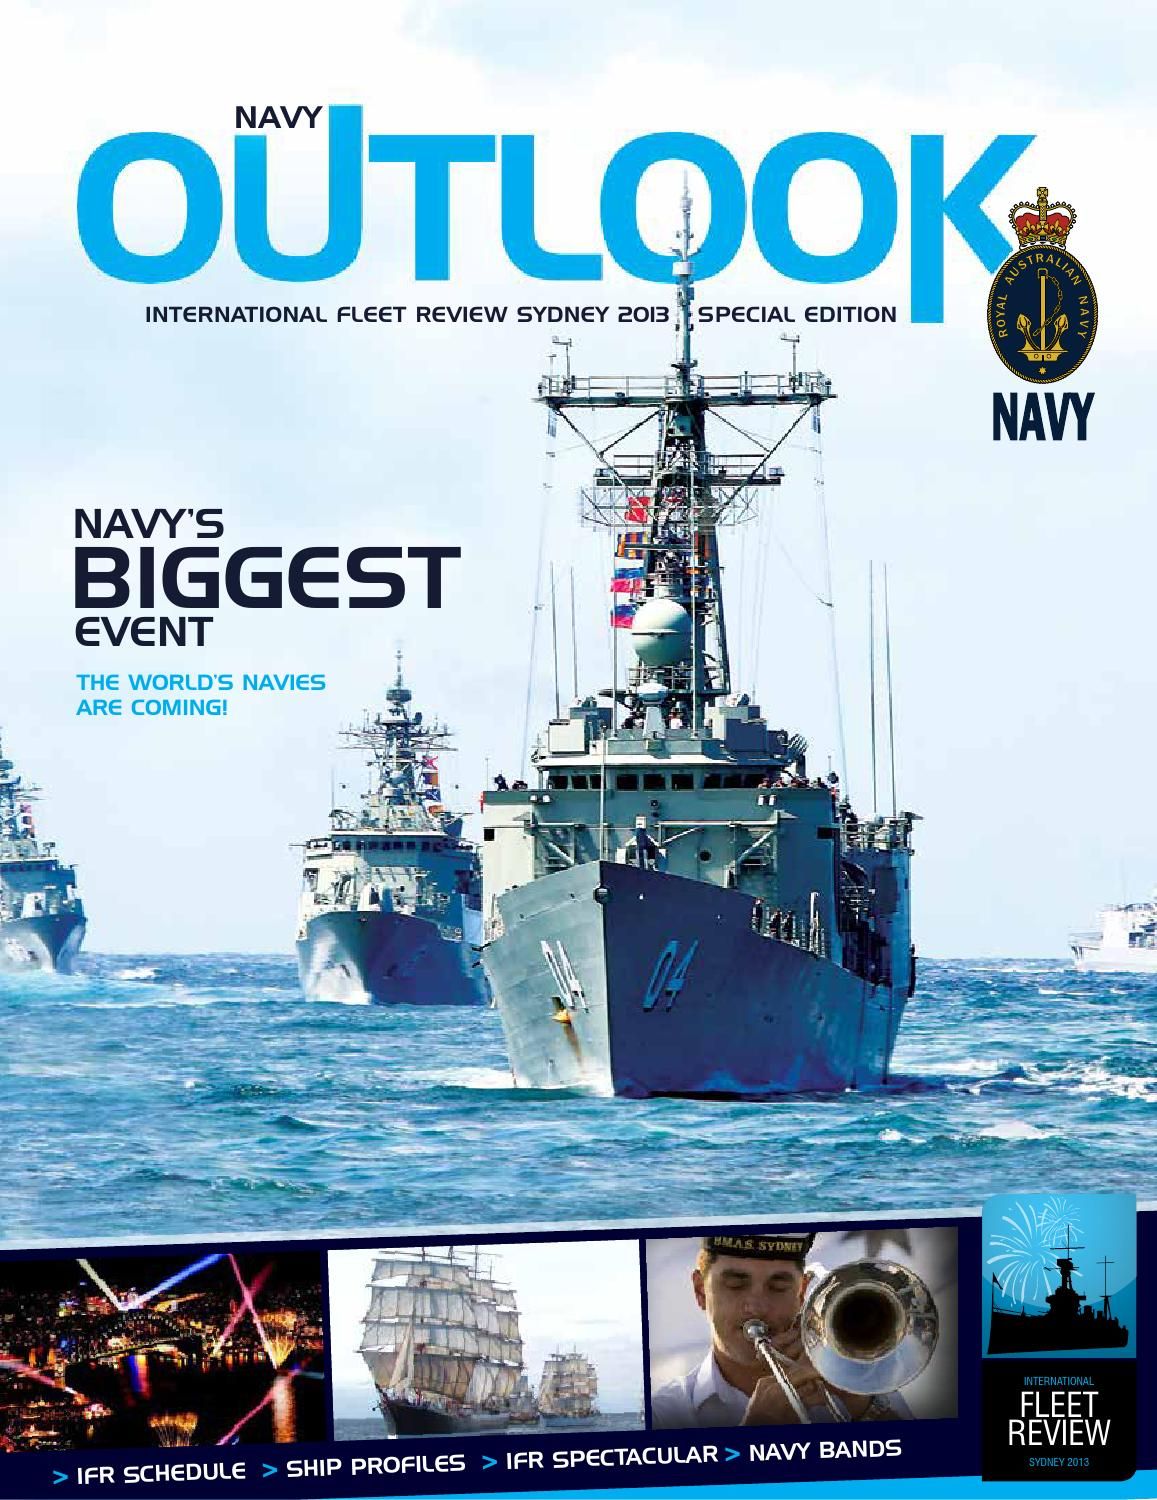 Navy Outlook 2013faircount Media Asia Pacific – Issuu For Flinders Forge 24 Inch Tier Pairs In Navy (View 17 of 20)